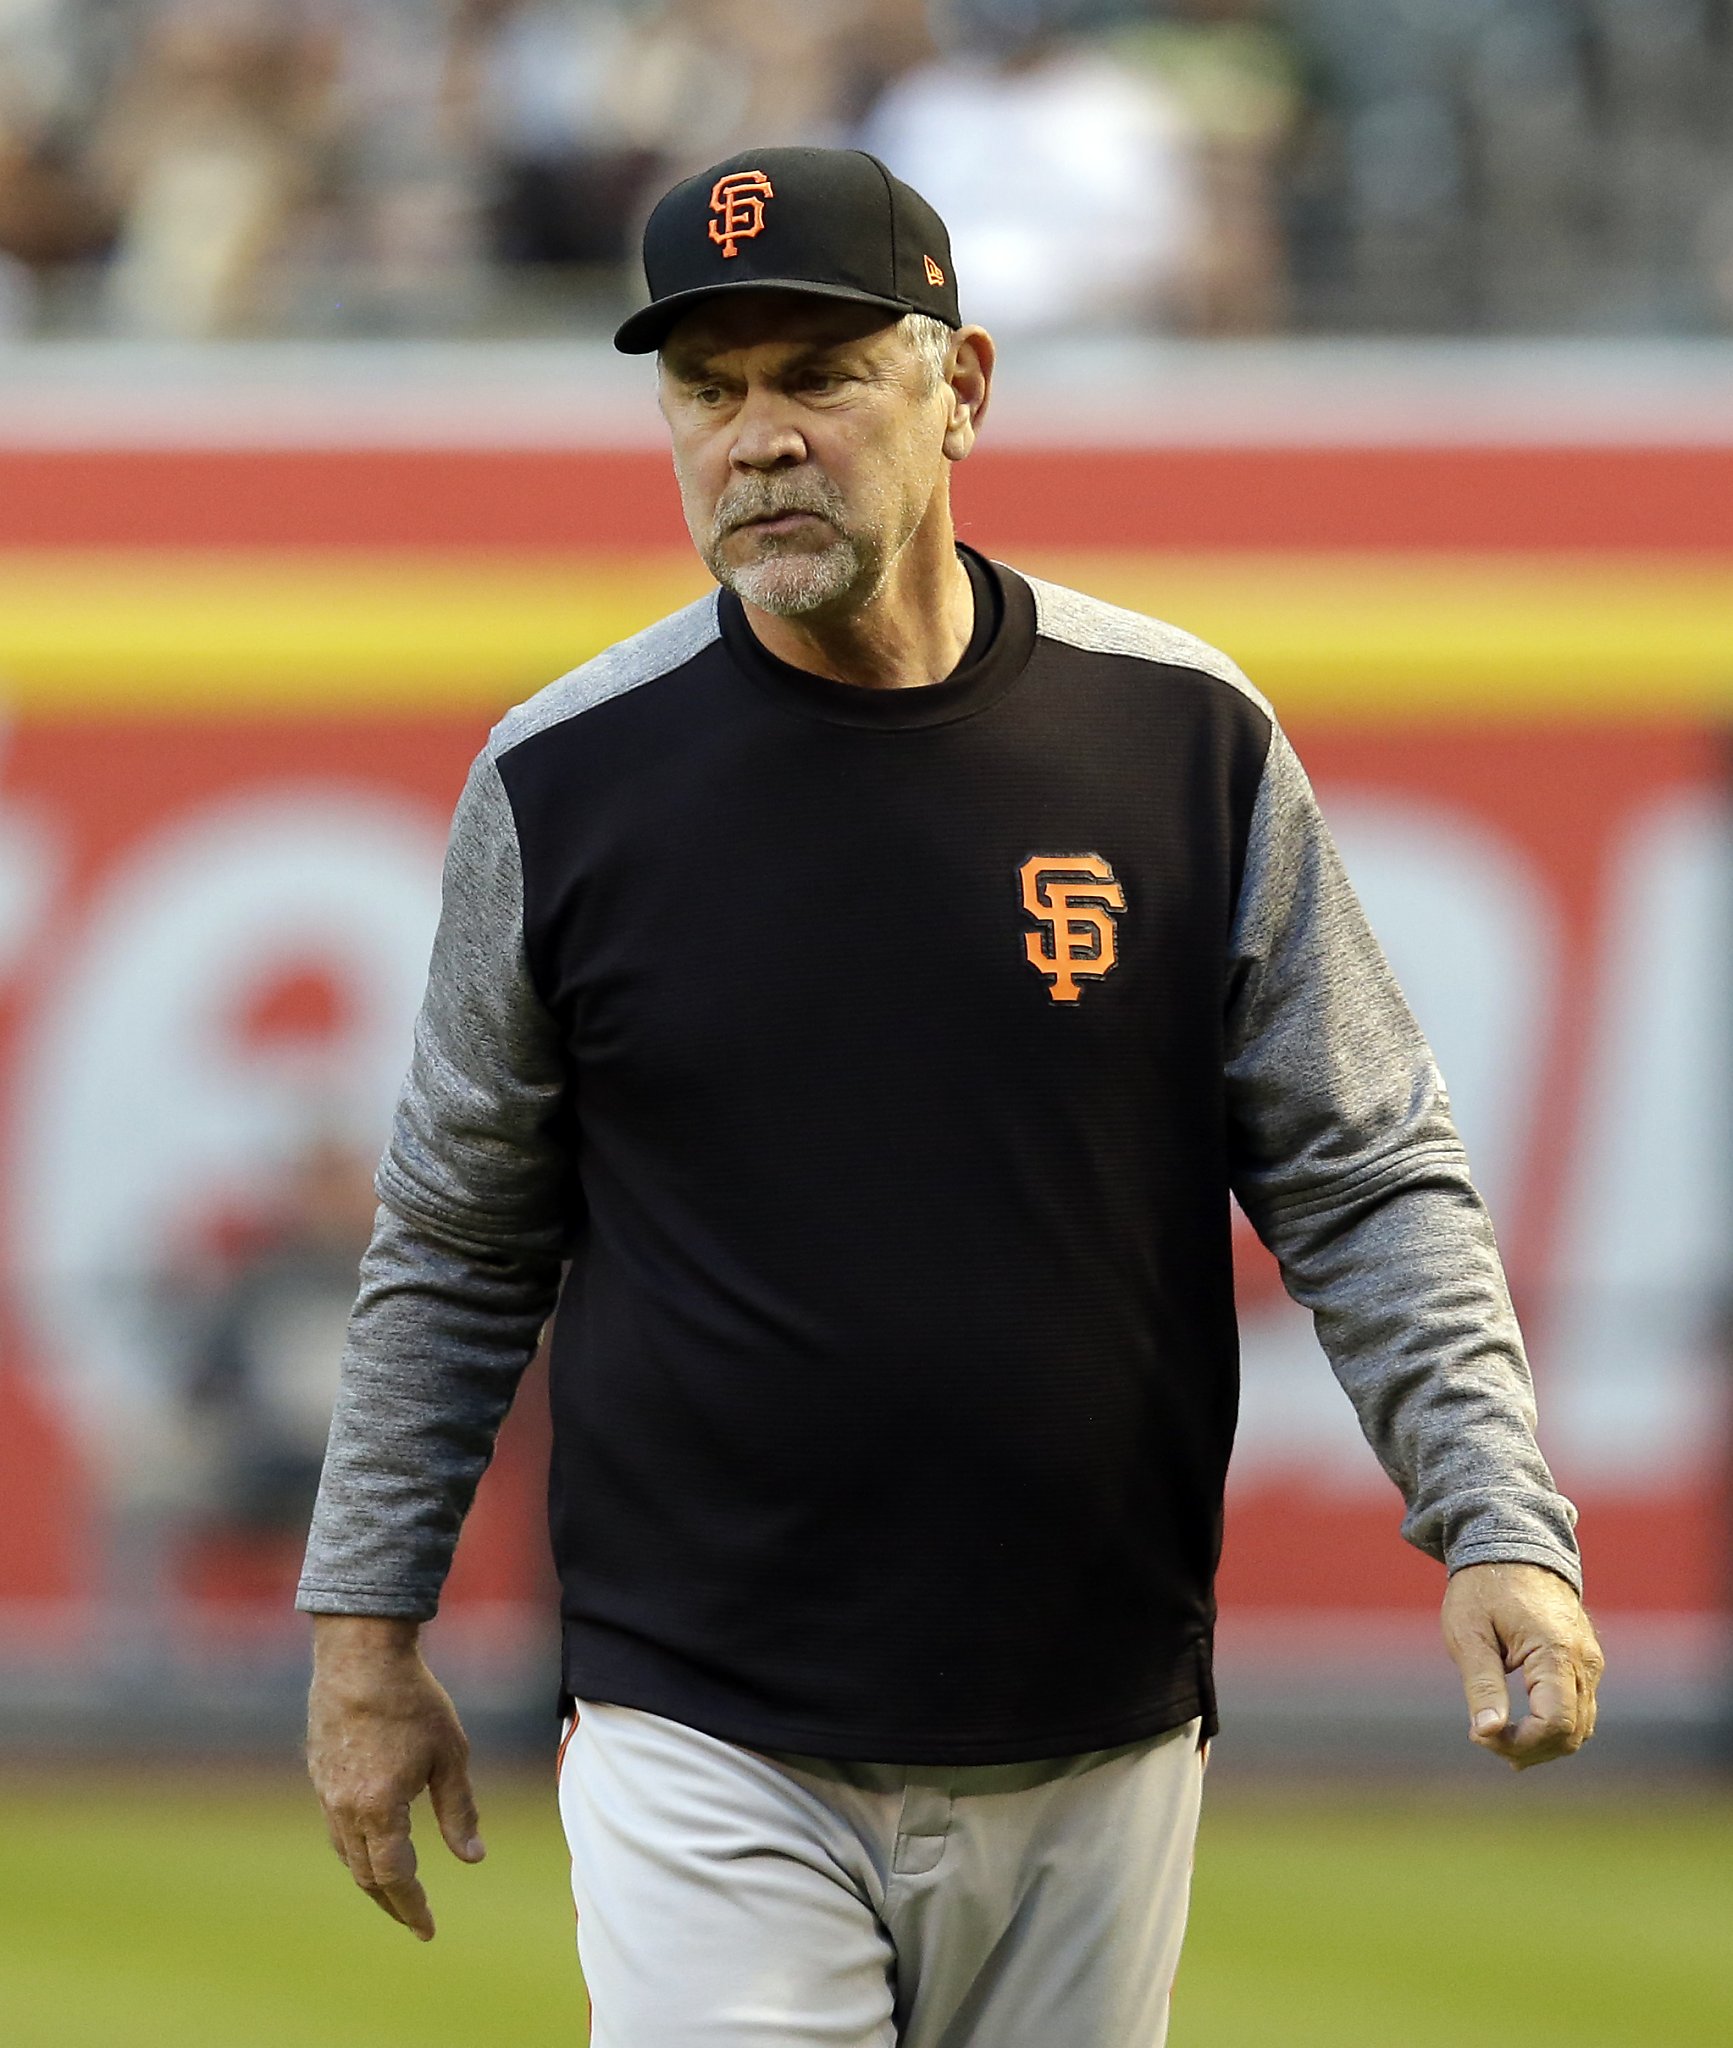 Bruce Bochy, Giants manager, wondering whether he can stay retired